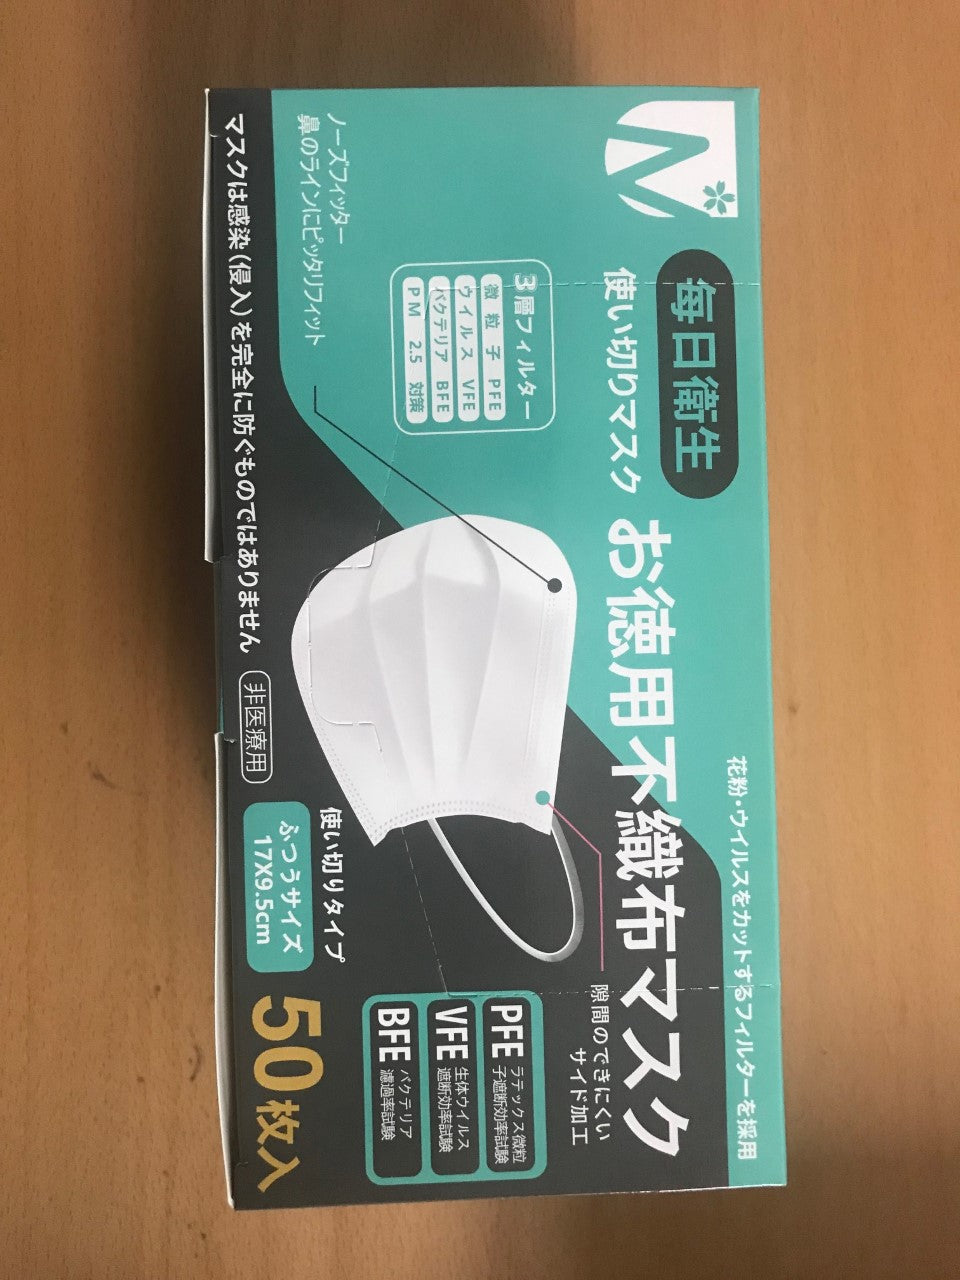 Japanese white face mask (50 per box)-eSafety Supplies, Inc